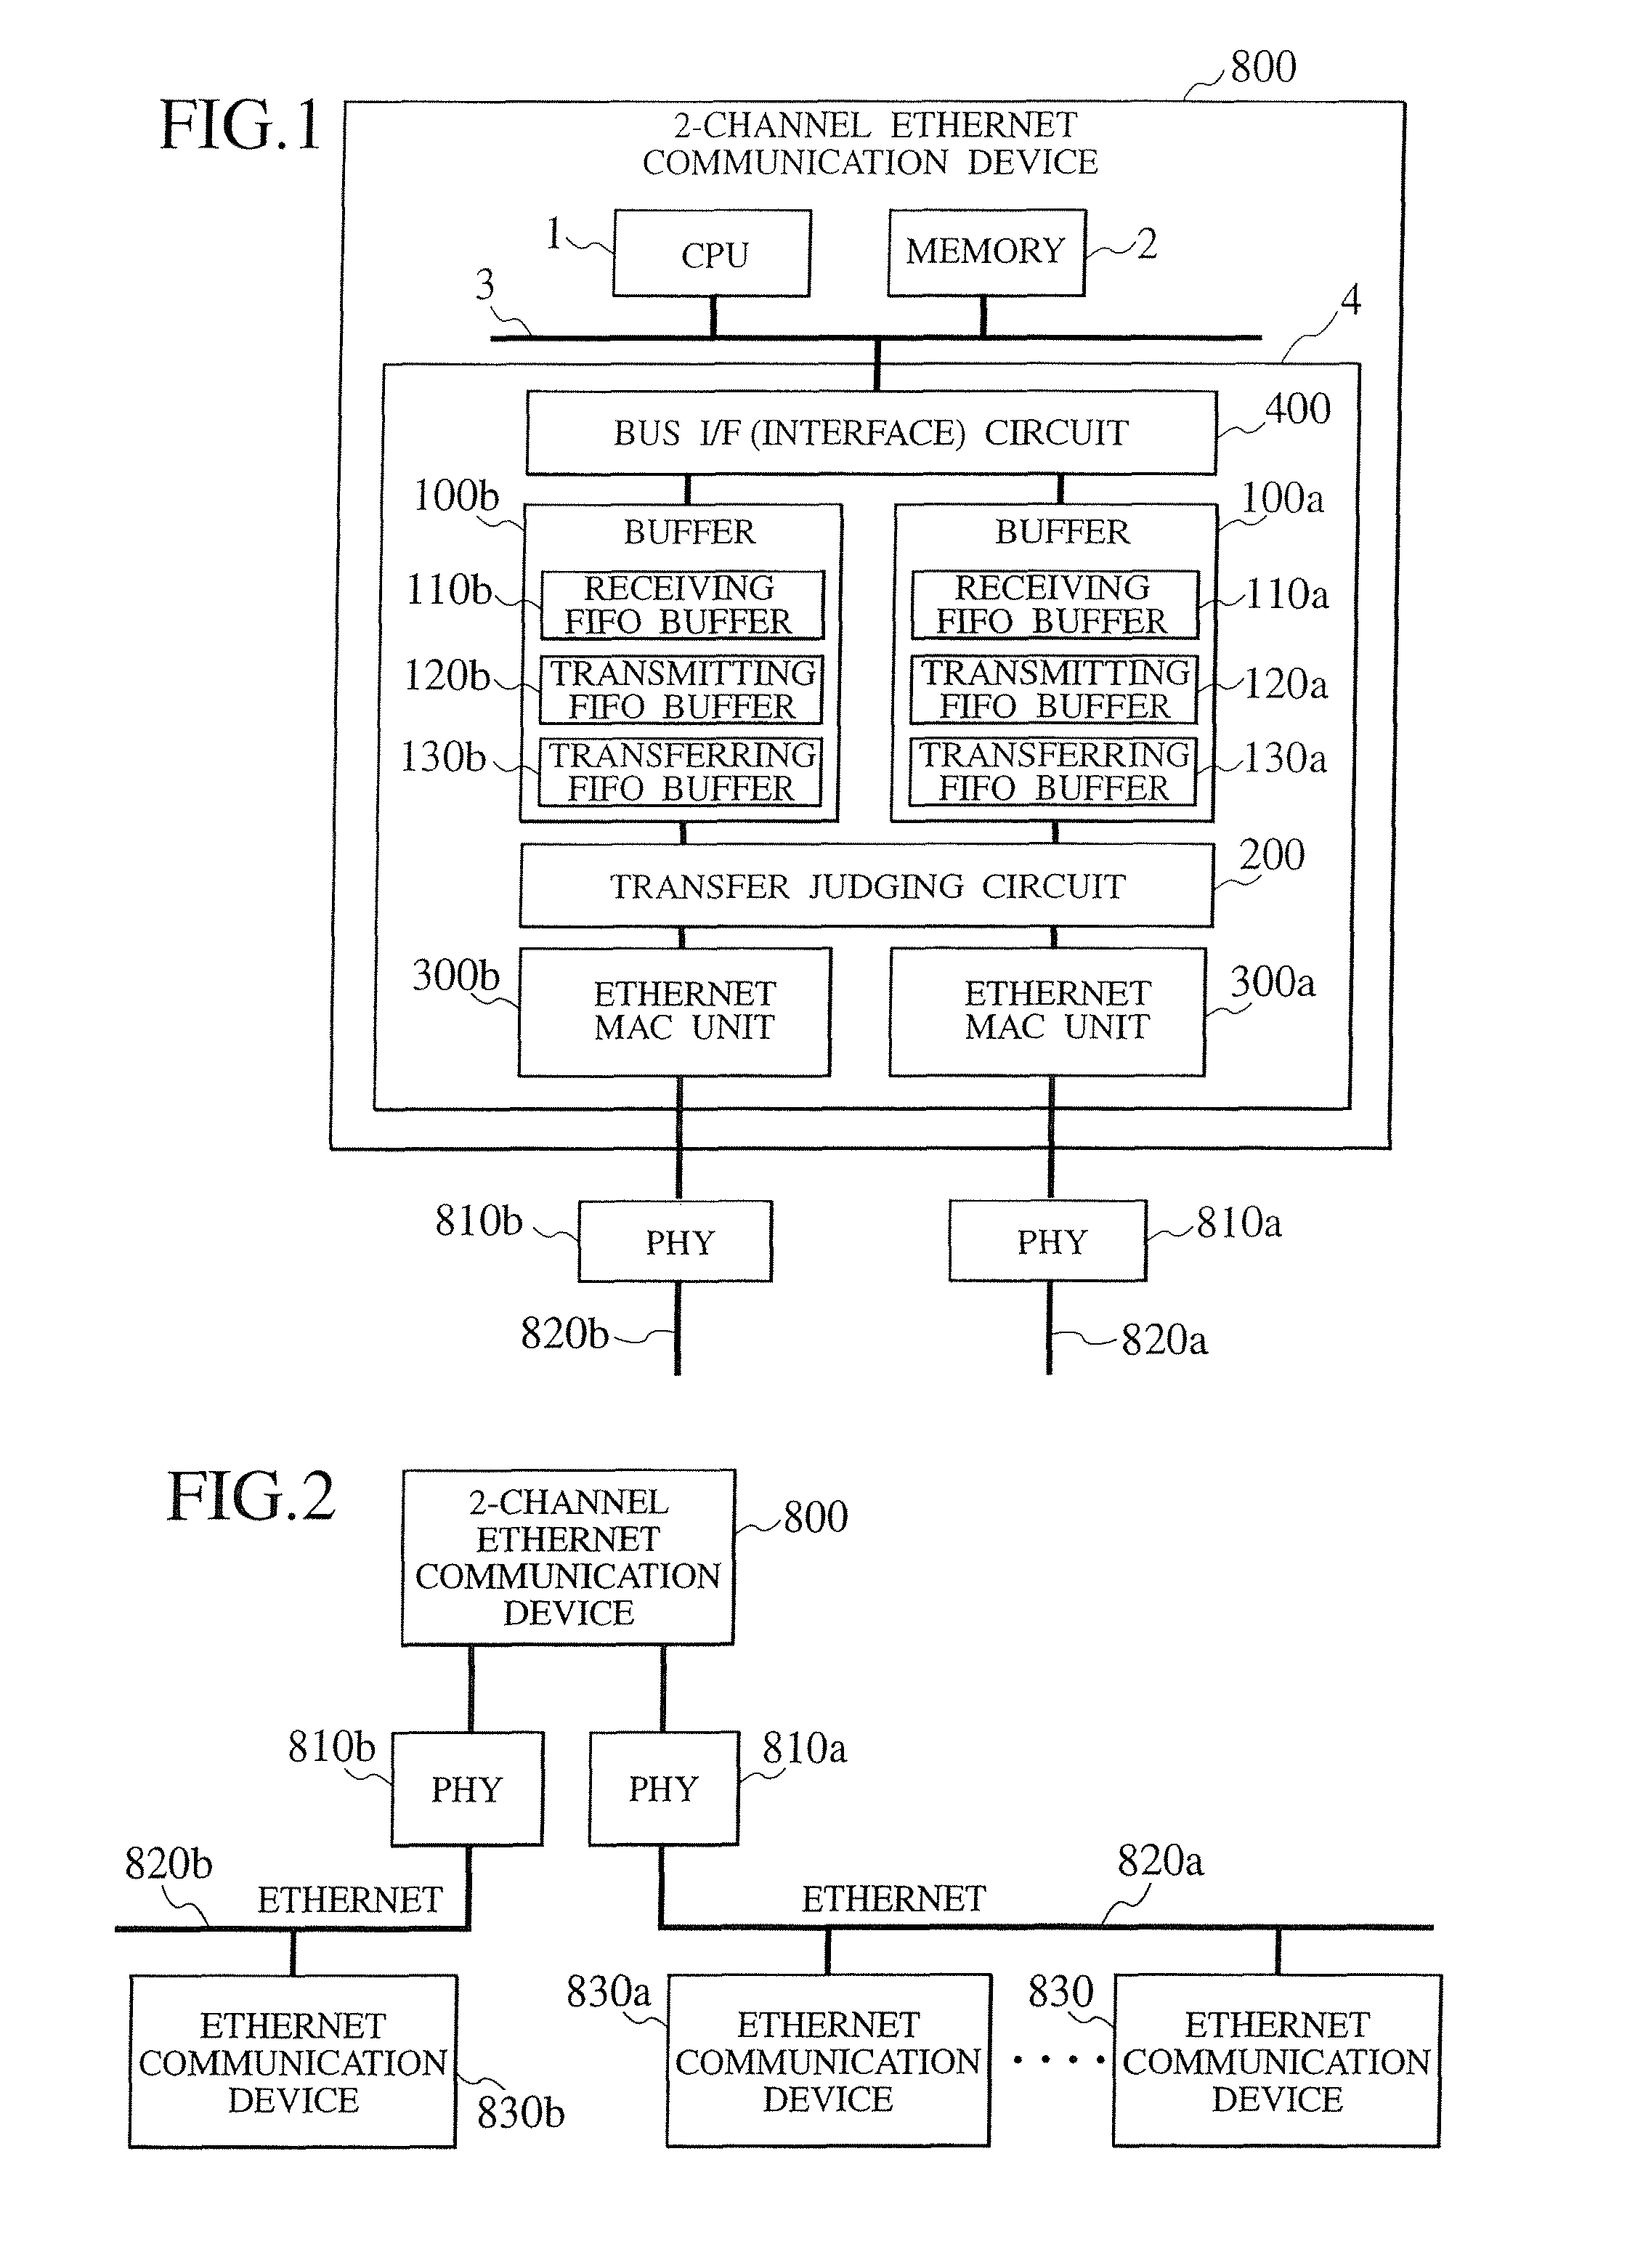 Packet communication device, packet communication system, packet communication system, packet communication module, data processor, and data transfer system